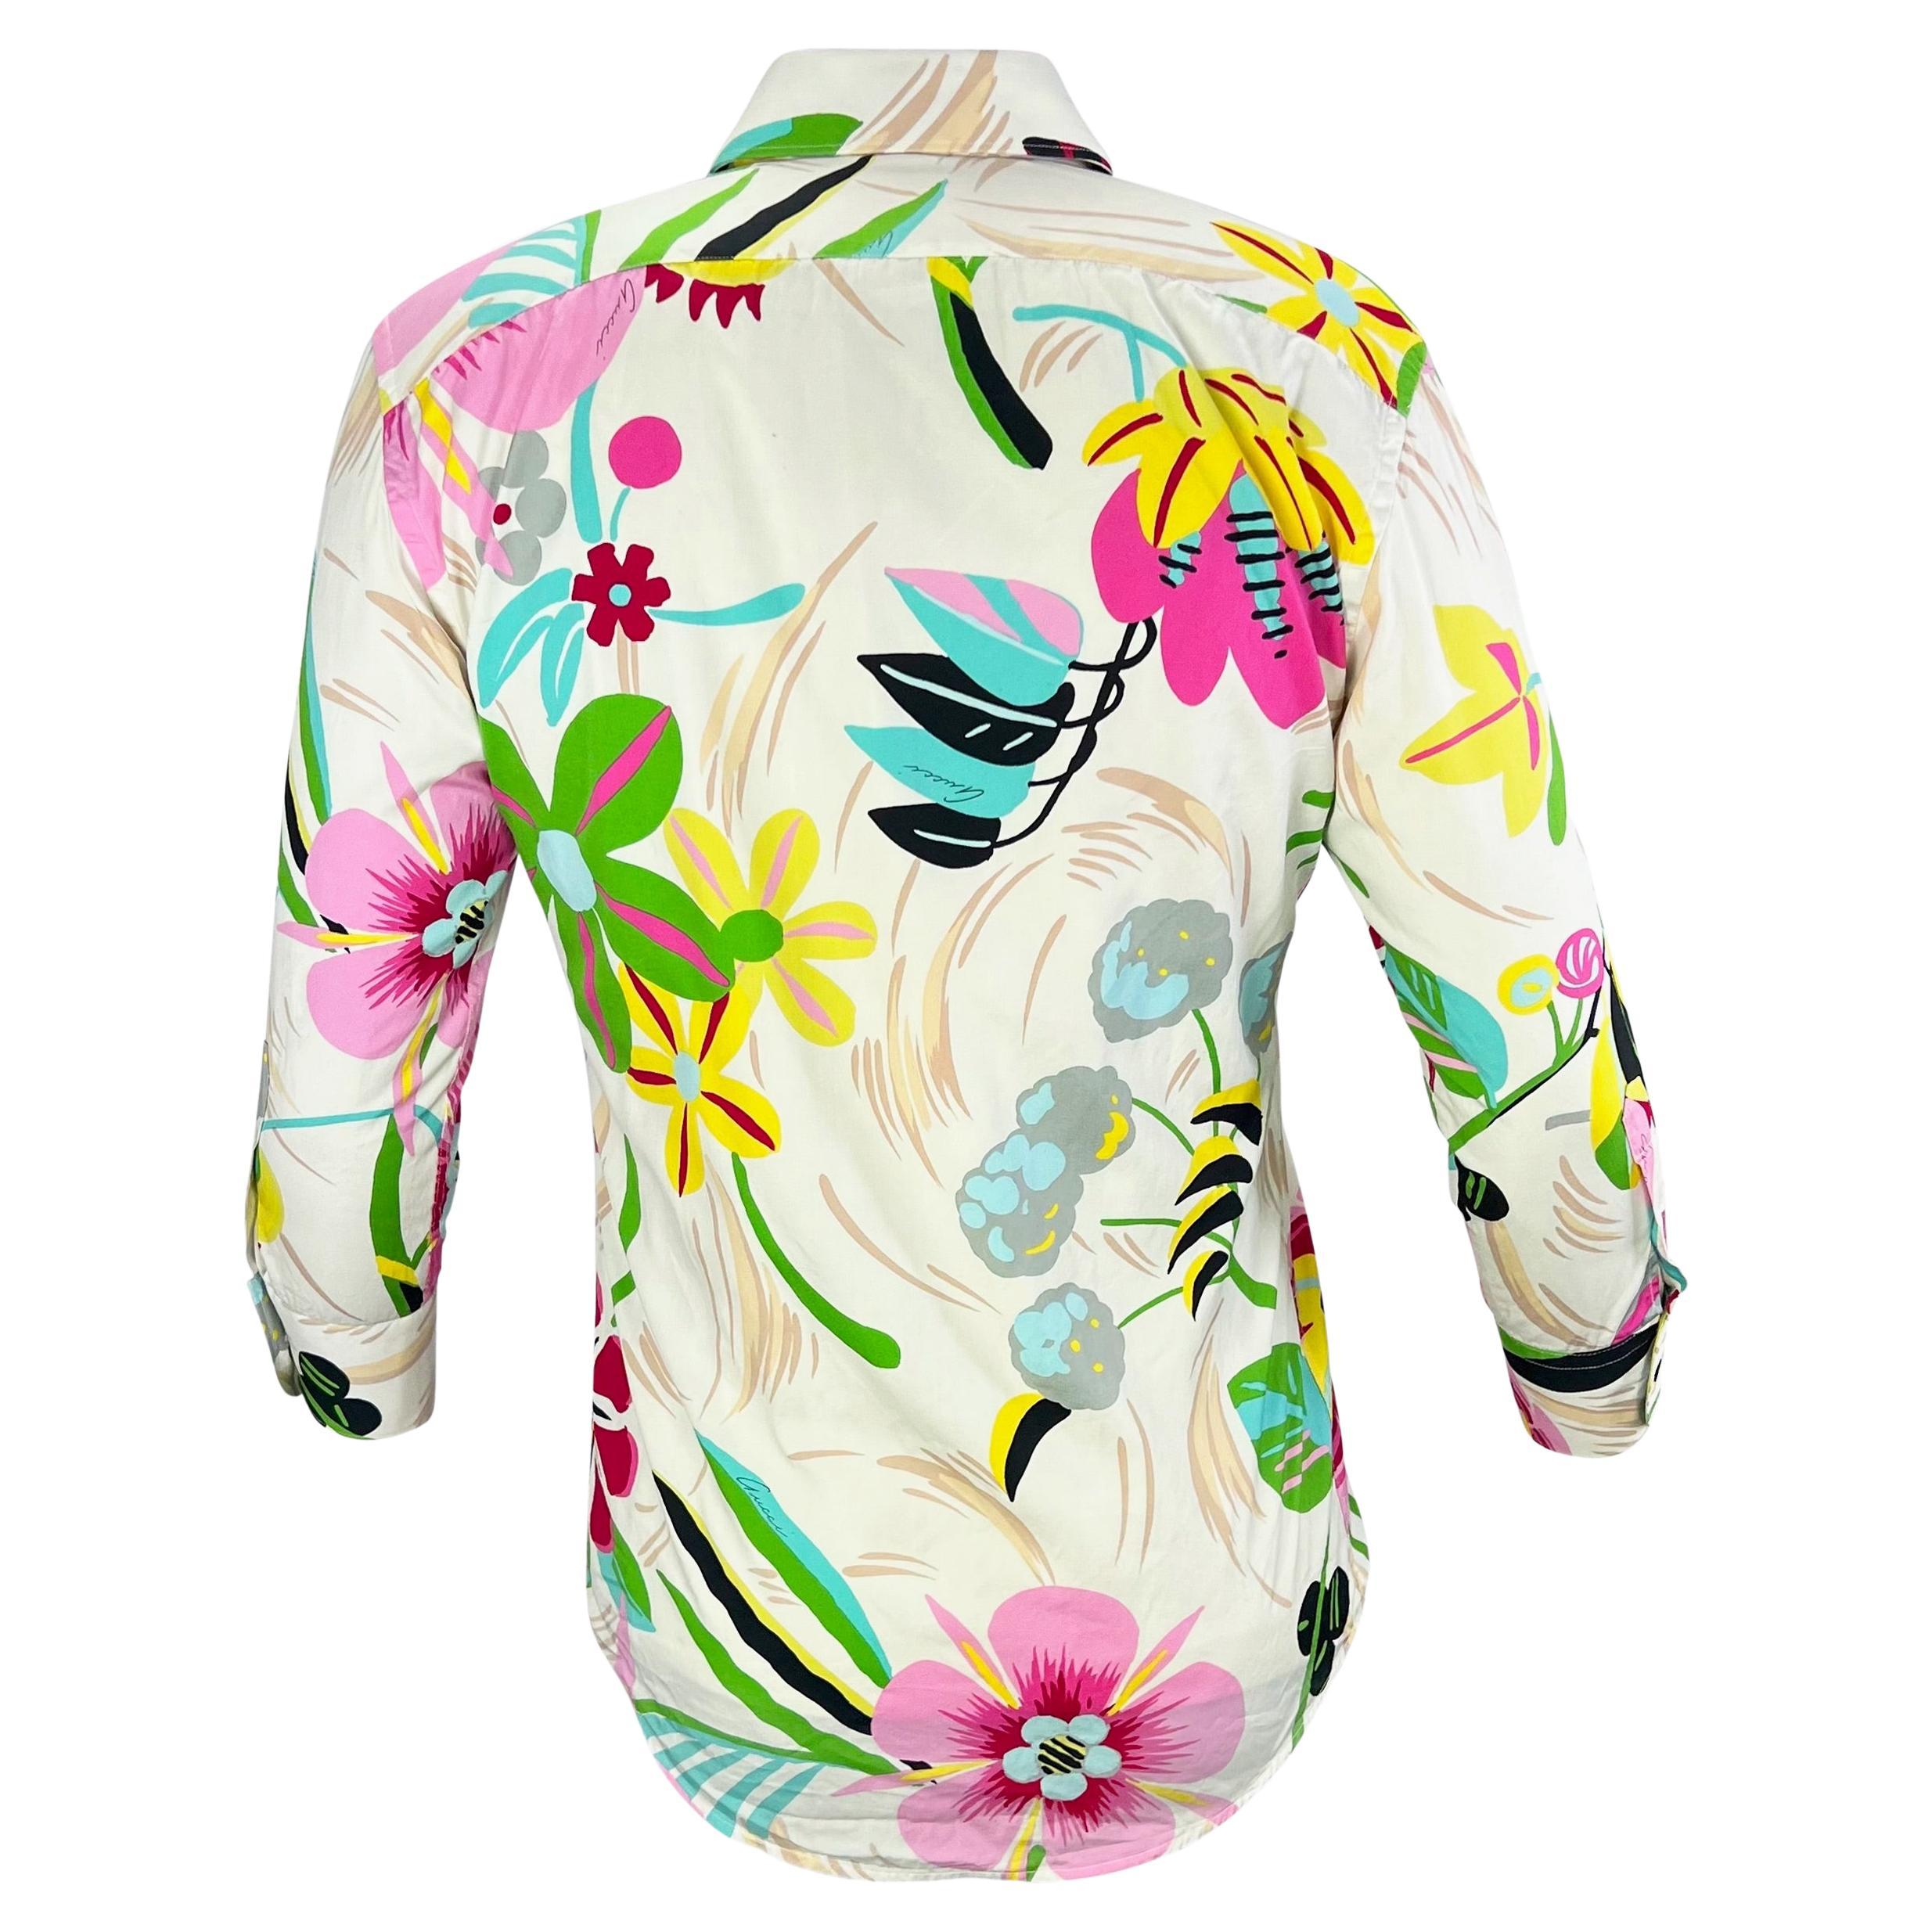 S/S 1999 Gucci by Tom Ford White Psychedelic Floral Button Up Men's Shirt In Excellent Condition For Sale In West Hollywood, CA